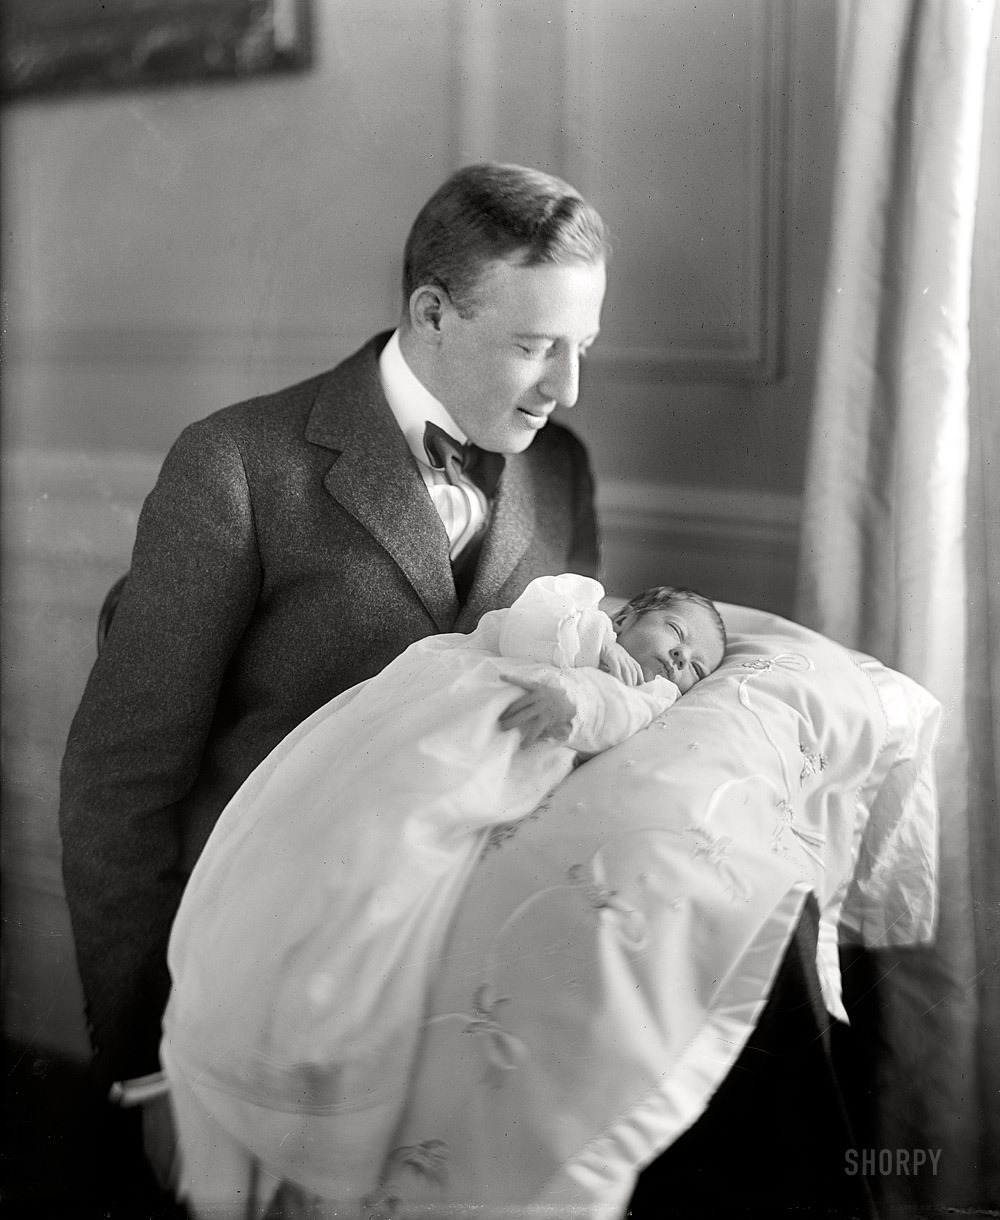 1915. Washington, D.C. "Francis Sayre Jr., baby, with father." Woodrow Wilson's son-in-law Francis B. Sayre with the President's new grandson. Harris & Ewing Collection glass negative. View full size. Happy Father's Day from Shorpy.